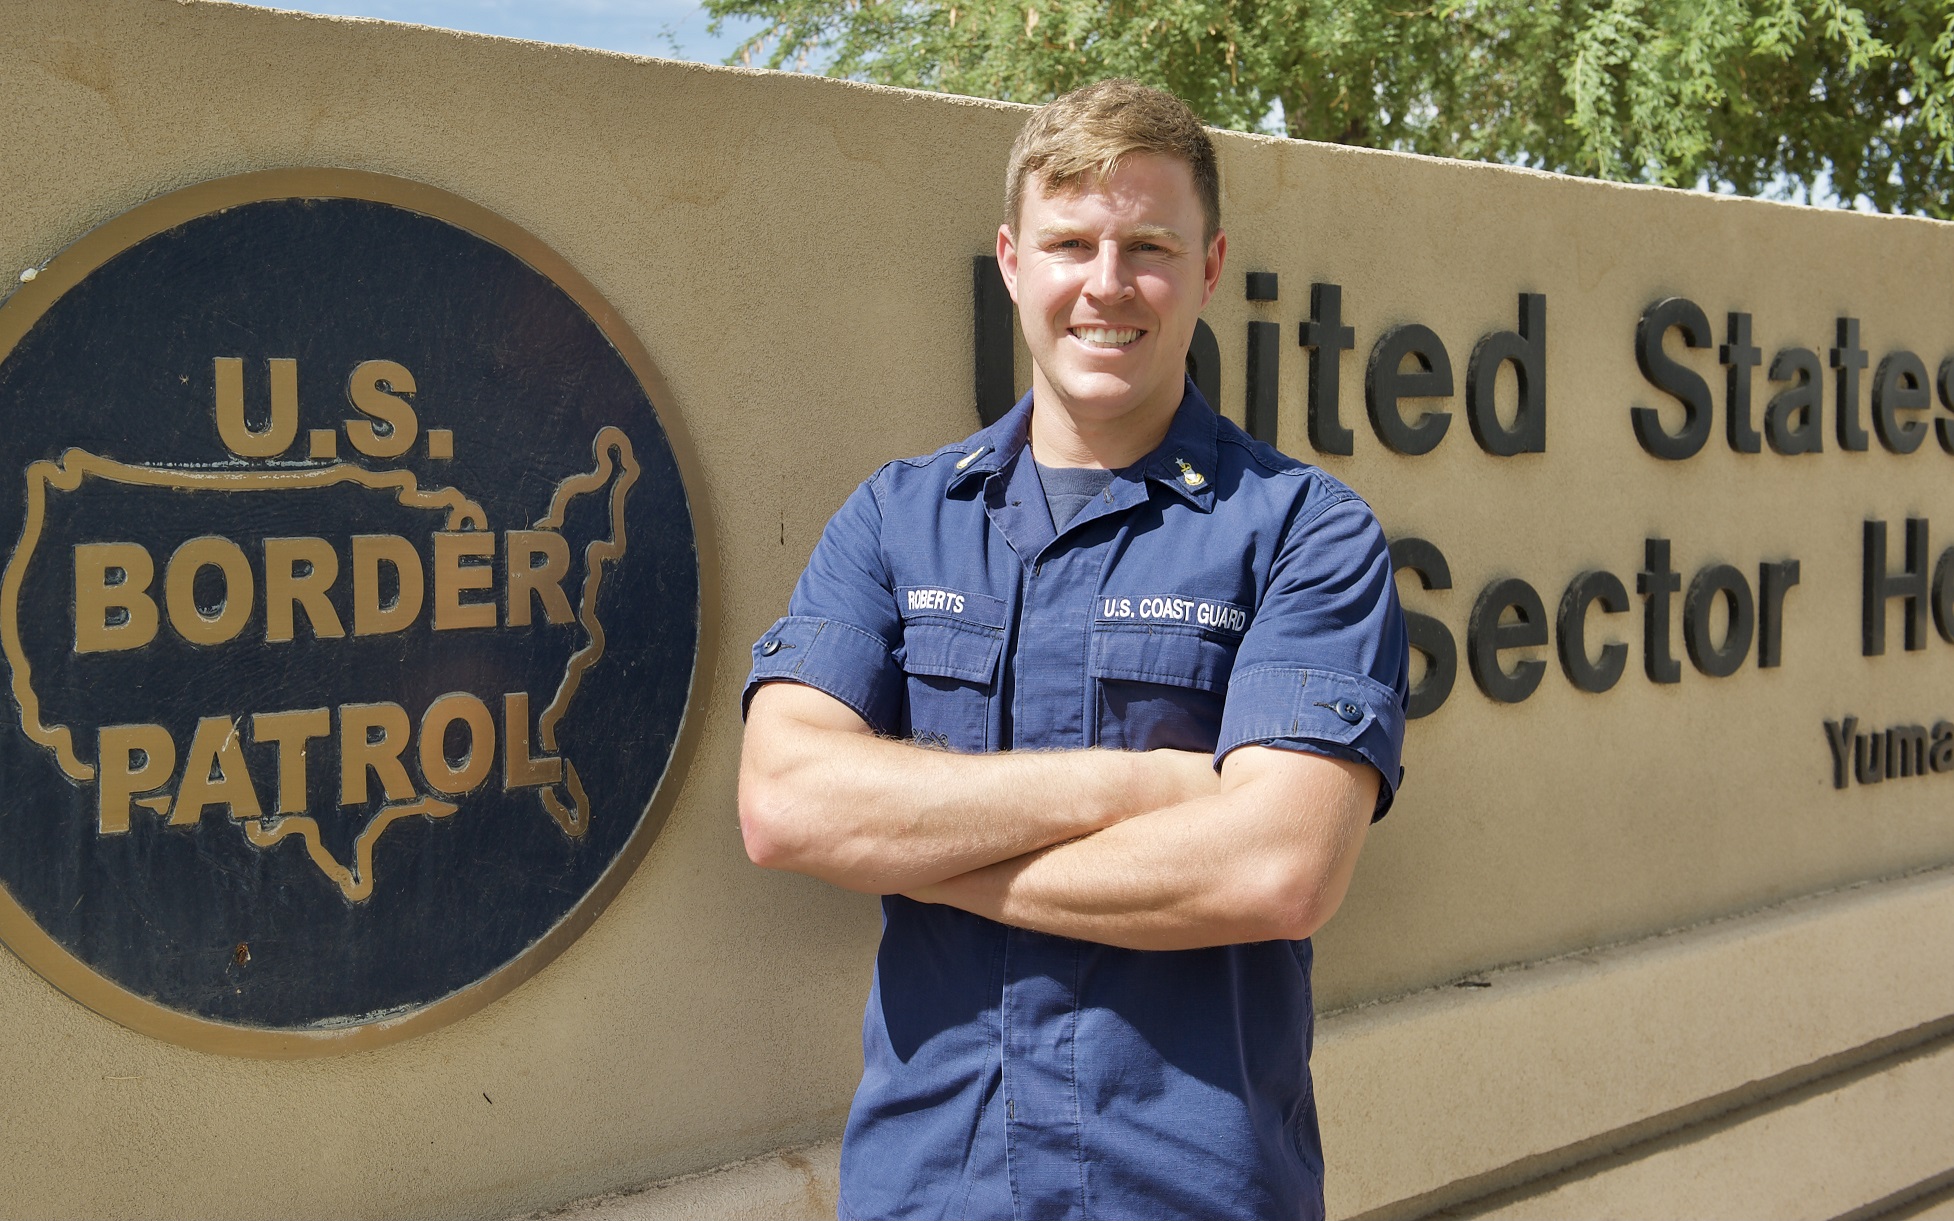 Senior Chief Petty Officer Travis L. Roberts, a health services technician, assigned to Port Security Unit Fort Eustis, Va. and currently mobilized to provide logistical and medical support at the Southwest Border for U.S. Customs and Border Protection, stands in front of the Border Patrol Sector Yuma Headquarters, Arizona, July 21, 2021, after being recognized with the Master Chief Petty Officer Angela M. McShan Inspirational Leadership Award. Photo By: Petty Officer 2nd Class Brandon Hillard. 